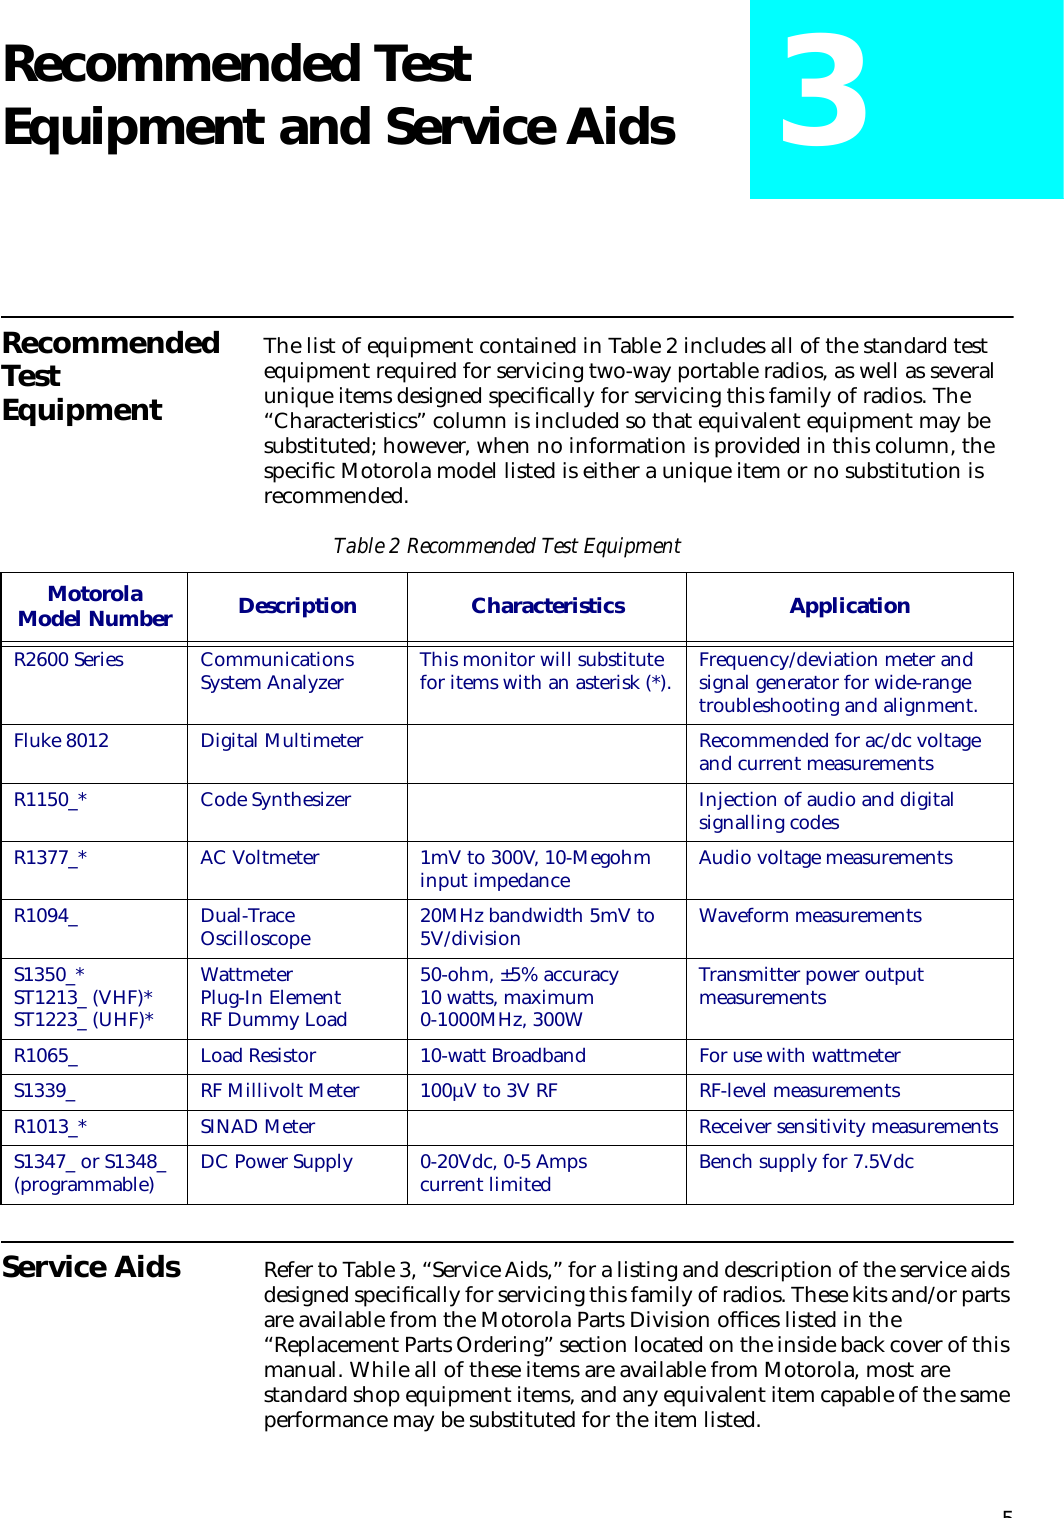 5Recommended Test Equipment and Service Aids 3RecommendedTest EquipmentThe list of equipment contained in Table 2 includes all of the standard test equipment required for servicing two-way portable radios, as well as several unique items designed speciﬁcally for servicing this family of radios. The “Characteristics” column is included so that equivalent equipment may be substituted; however, when no information is provided in this column, the speciﬁc Motorola model listed is either a unique item or no substitution is recommended.Service Aids  Refer to Table 3, “Service Aids,” for a listing and description of the service aids designed speciﬁcally for servicing this family of radios. These kits and/or parts are available from the Motorola Parts Division ofﬁces listed in the “Replacement Parts Ordering” section located on the inside back cover of this manual. While all of these items are available from Motorola, most are standard shop equipment items, and any equivalent item capable of the same performance may be substituted for the item listed.Table 2 Recommended Test EquipmentMotorolaModel Number Description Characteristics ApplicationR2600 Series Communications System Analyzer This monitor will substitute for items with an asterisk (*). Frequency/deviation meter and signal generator for wide-range troubleshooting and alignment.Fluke 8012 Digital Multimeter Recommended for ac/dc voltage and current measurementsR1150_* Code Synthesizer Injection of audio and digital signalling codesR1377_* AC Voltmeter 1mV to 300V, 10-Megohm input impedance Audio voltage measurementsR1094_ Dual-Trace Oscilloscope 20MHz bandwidth 5mV to 5V/division Waveform measurementsS1350_*ST1213_ (VHF)*ST1223_ (UHF)*WattmeterPlug-In ElementRF Dummy Load50-ohm, ±5% accuracy10 watts, maximum0-1000MHz, 300WTransmitter power output measurementsR1065_ Load Resistor 10-watt Broadband For use with wattmeterS1339_ RF Millivolt Meter 100µV to 3V RF RF-level measurementsR1013_* SINAD Meter Receiver sensitivity measurementsS1347_ or S1348_ (programmable) DC Power Supply 0-20Vdc, 0-5 Amps current limited Bench supply for 7.5Vdc